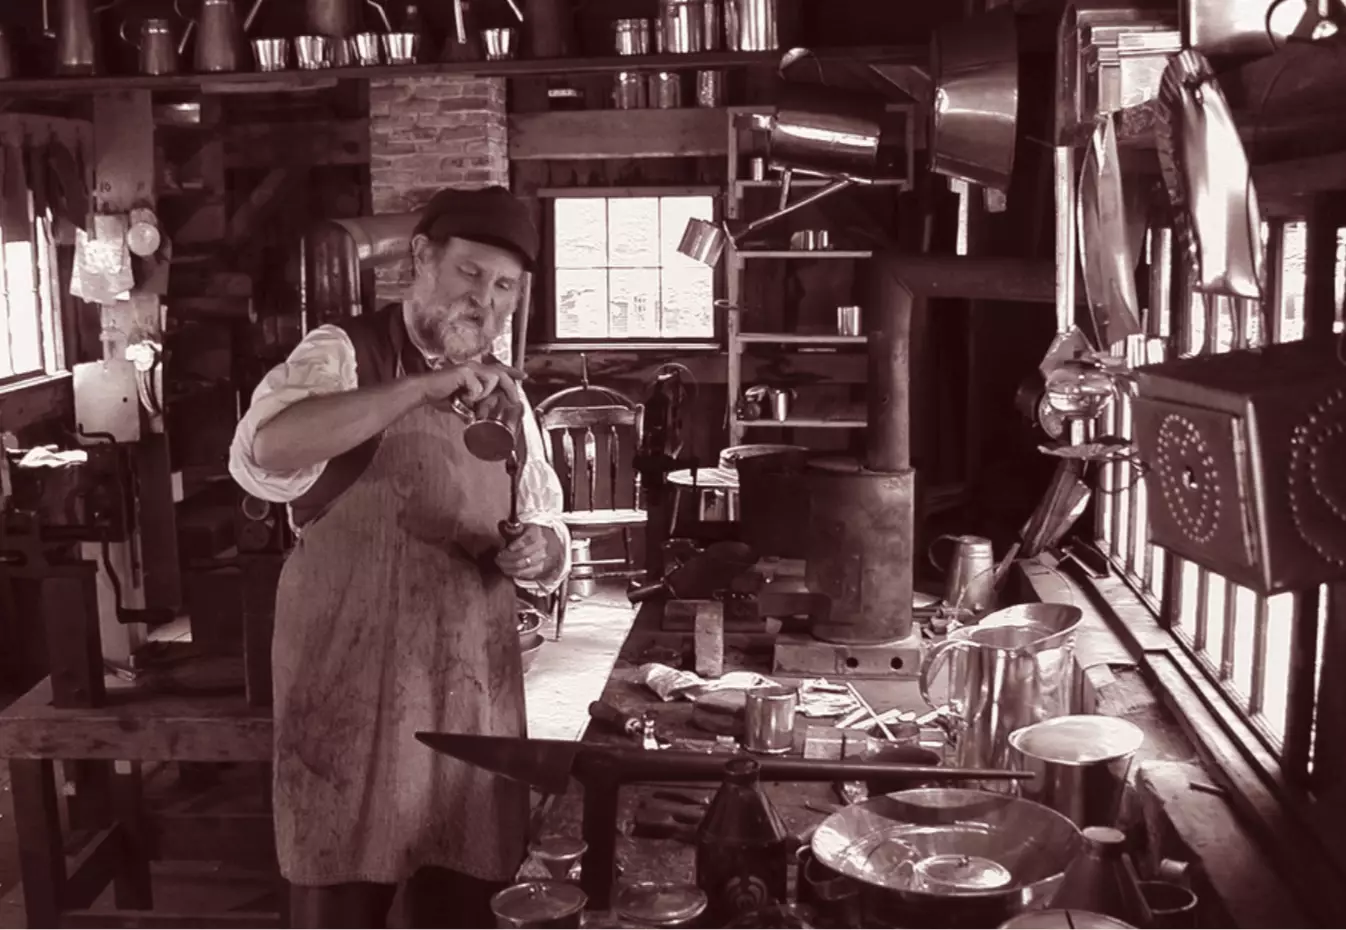 Man wearing an apron stands inside a workshop surrounded by tools and work surfaces